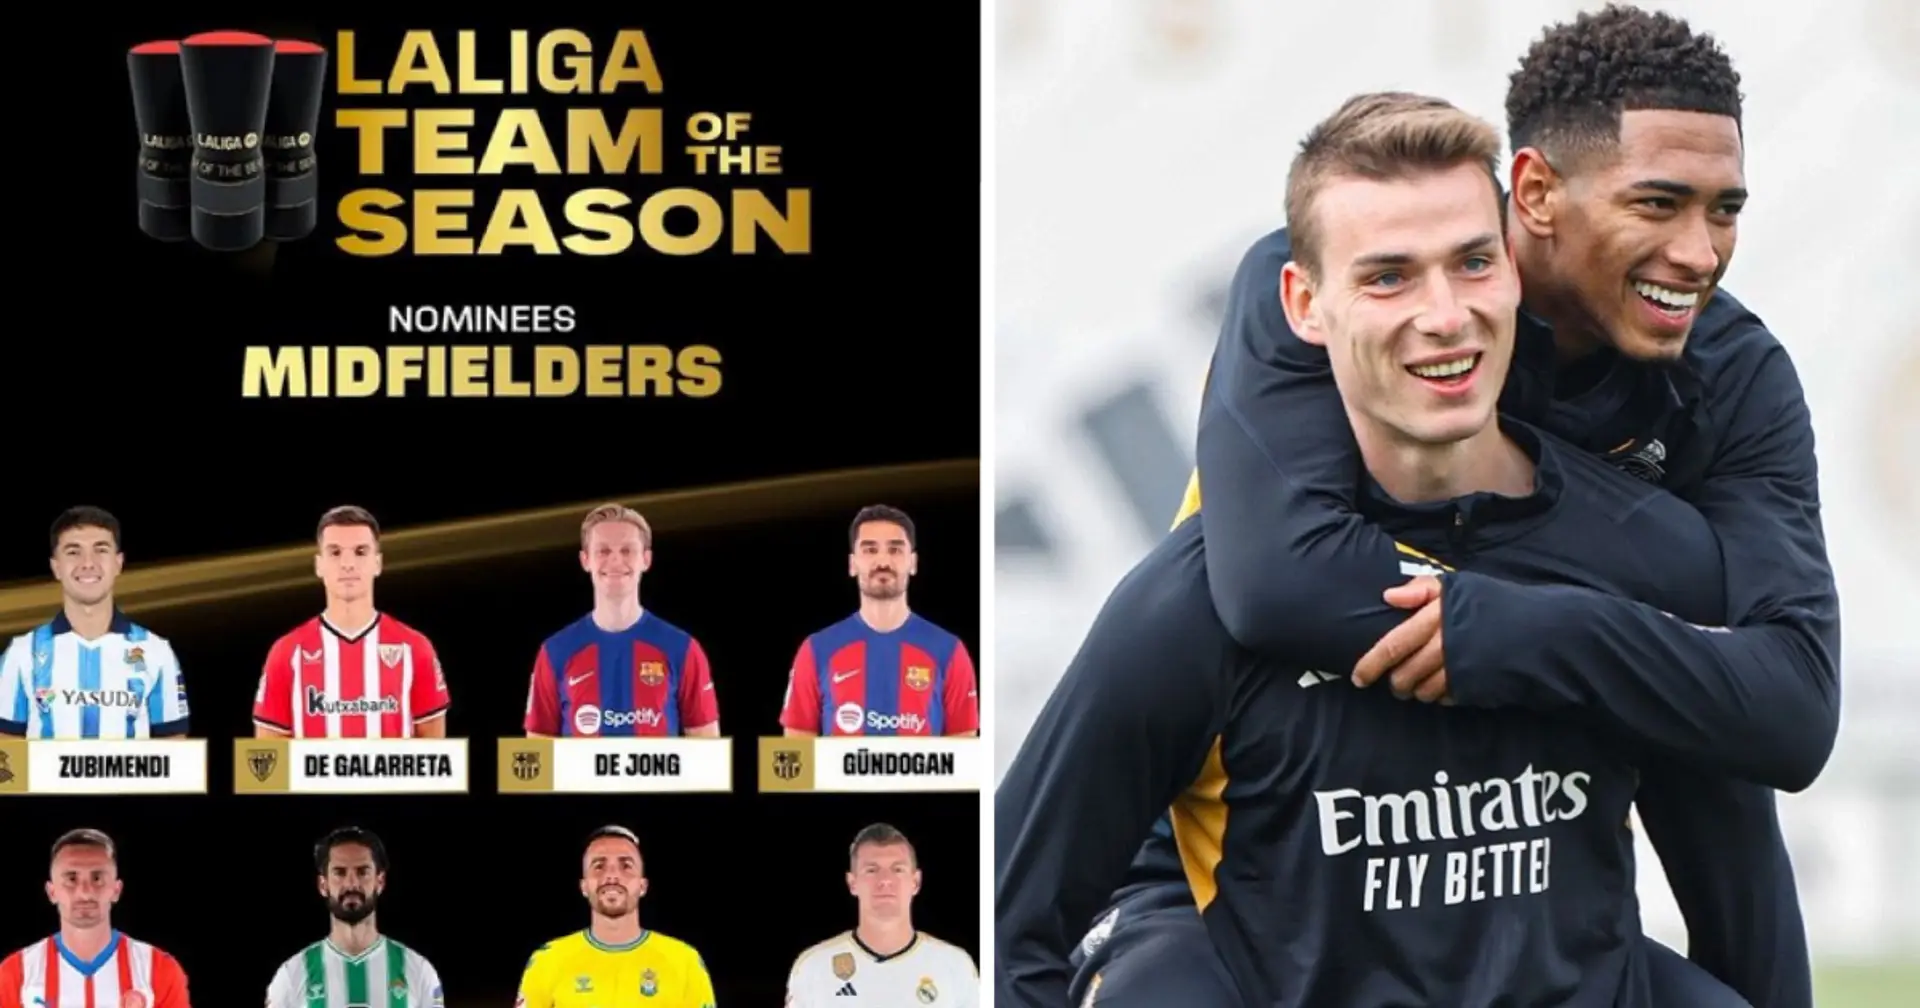 8 Real Madrid players nominated for La Liga Team of the Season — Lunin and Bellingham in